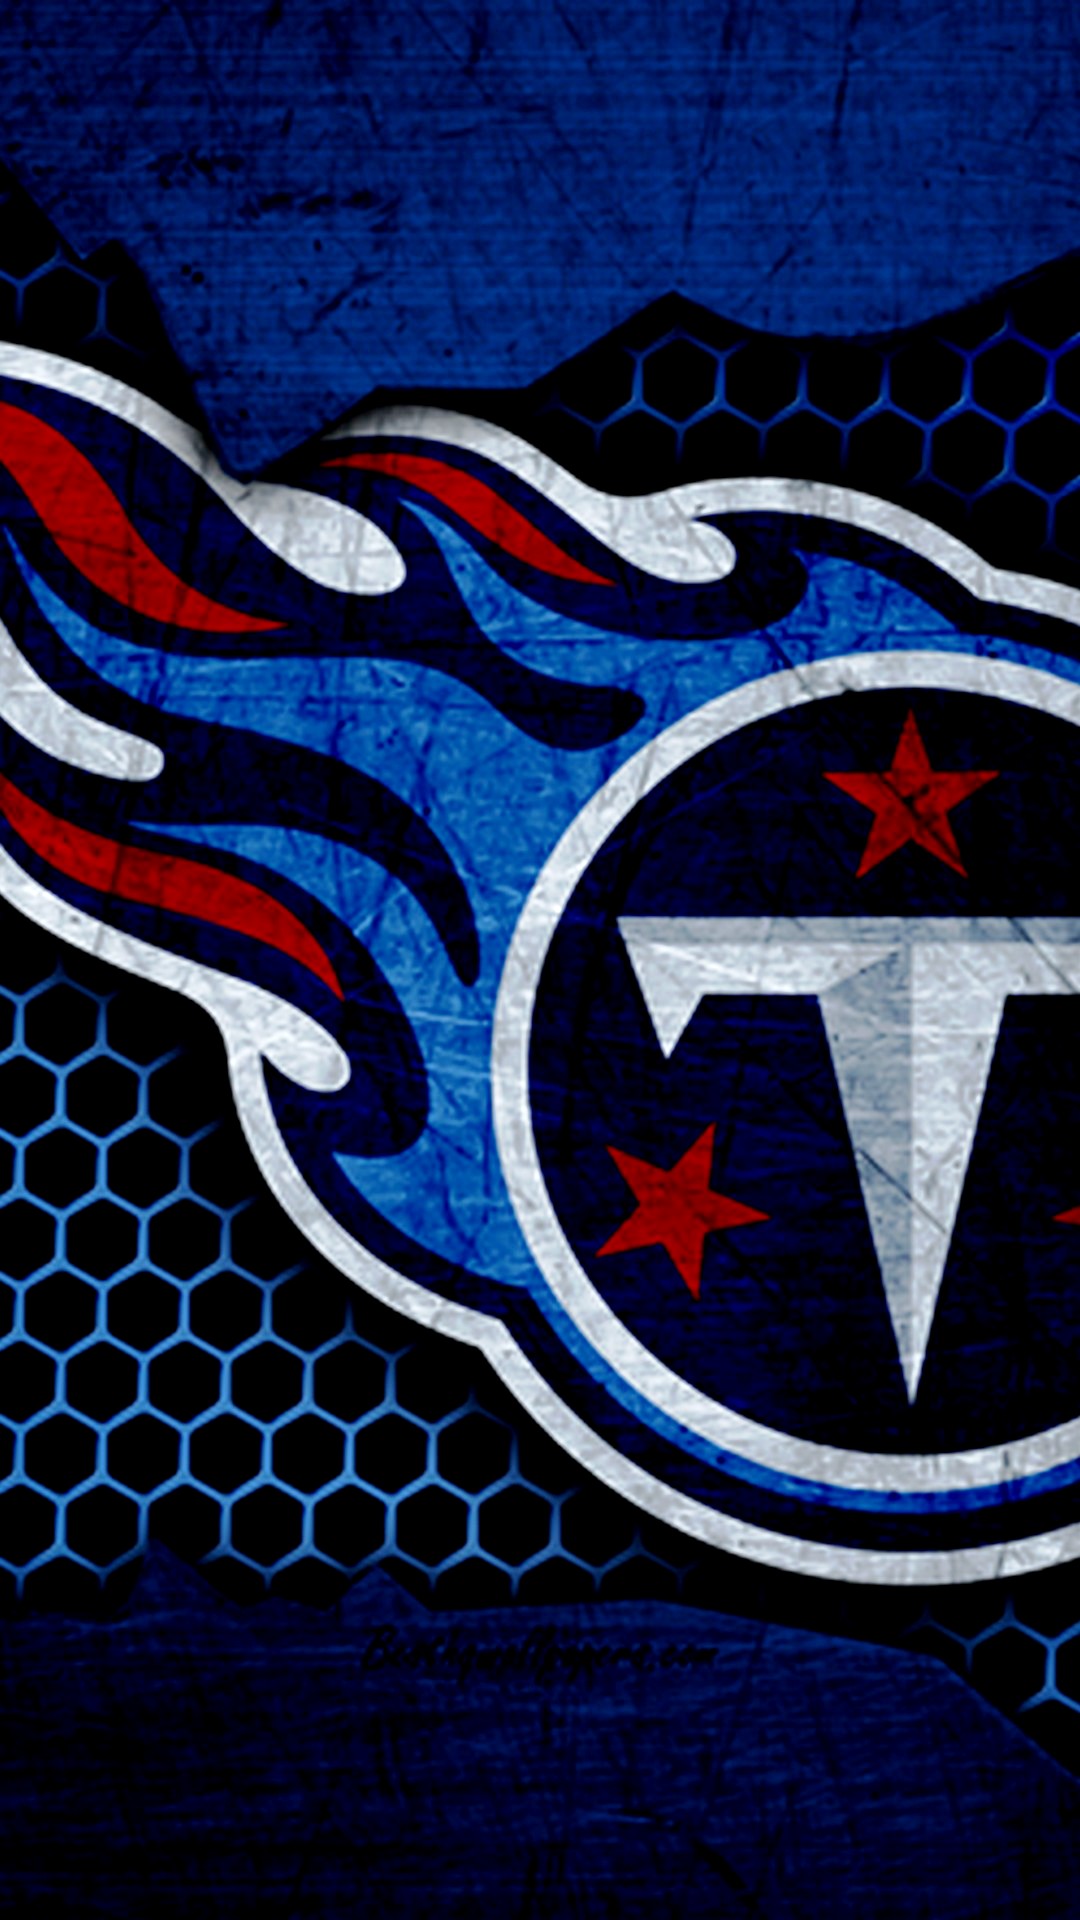 Tennessee Titans iPhone Screen Lock Wallpaper with high-resolution 1080x1920 pixel. Download and set as wallpaper for Desktop Computer, Apple iPhone X, XS Max, XR, 8, 7, 6, SE, iPad, Android